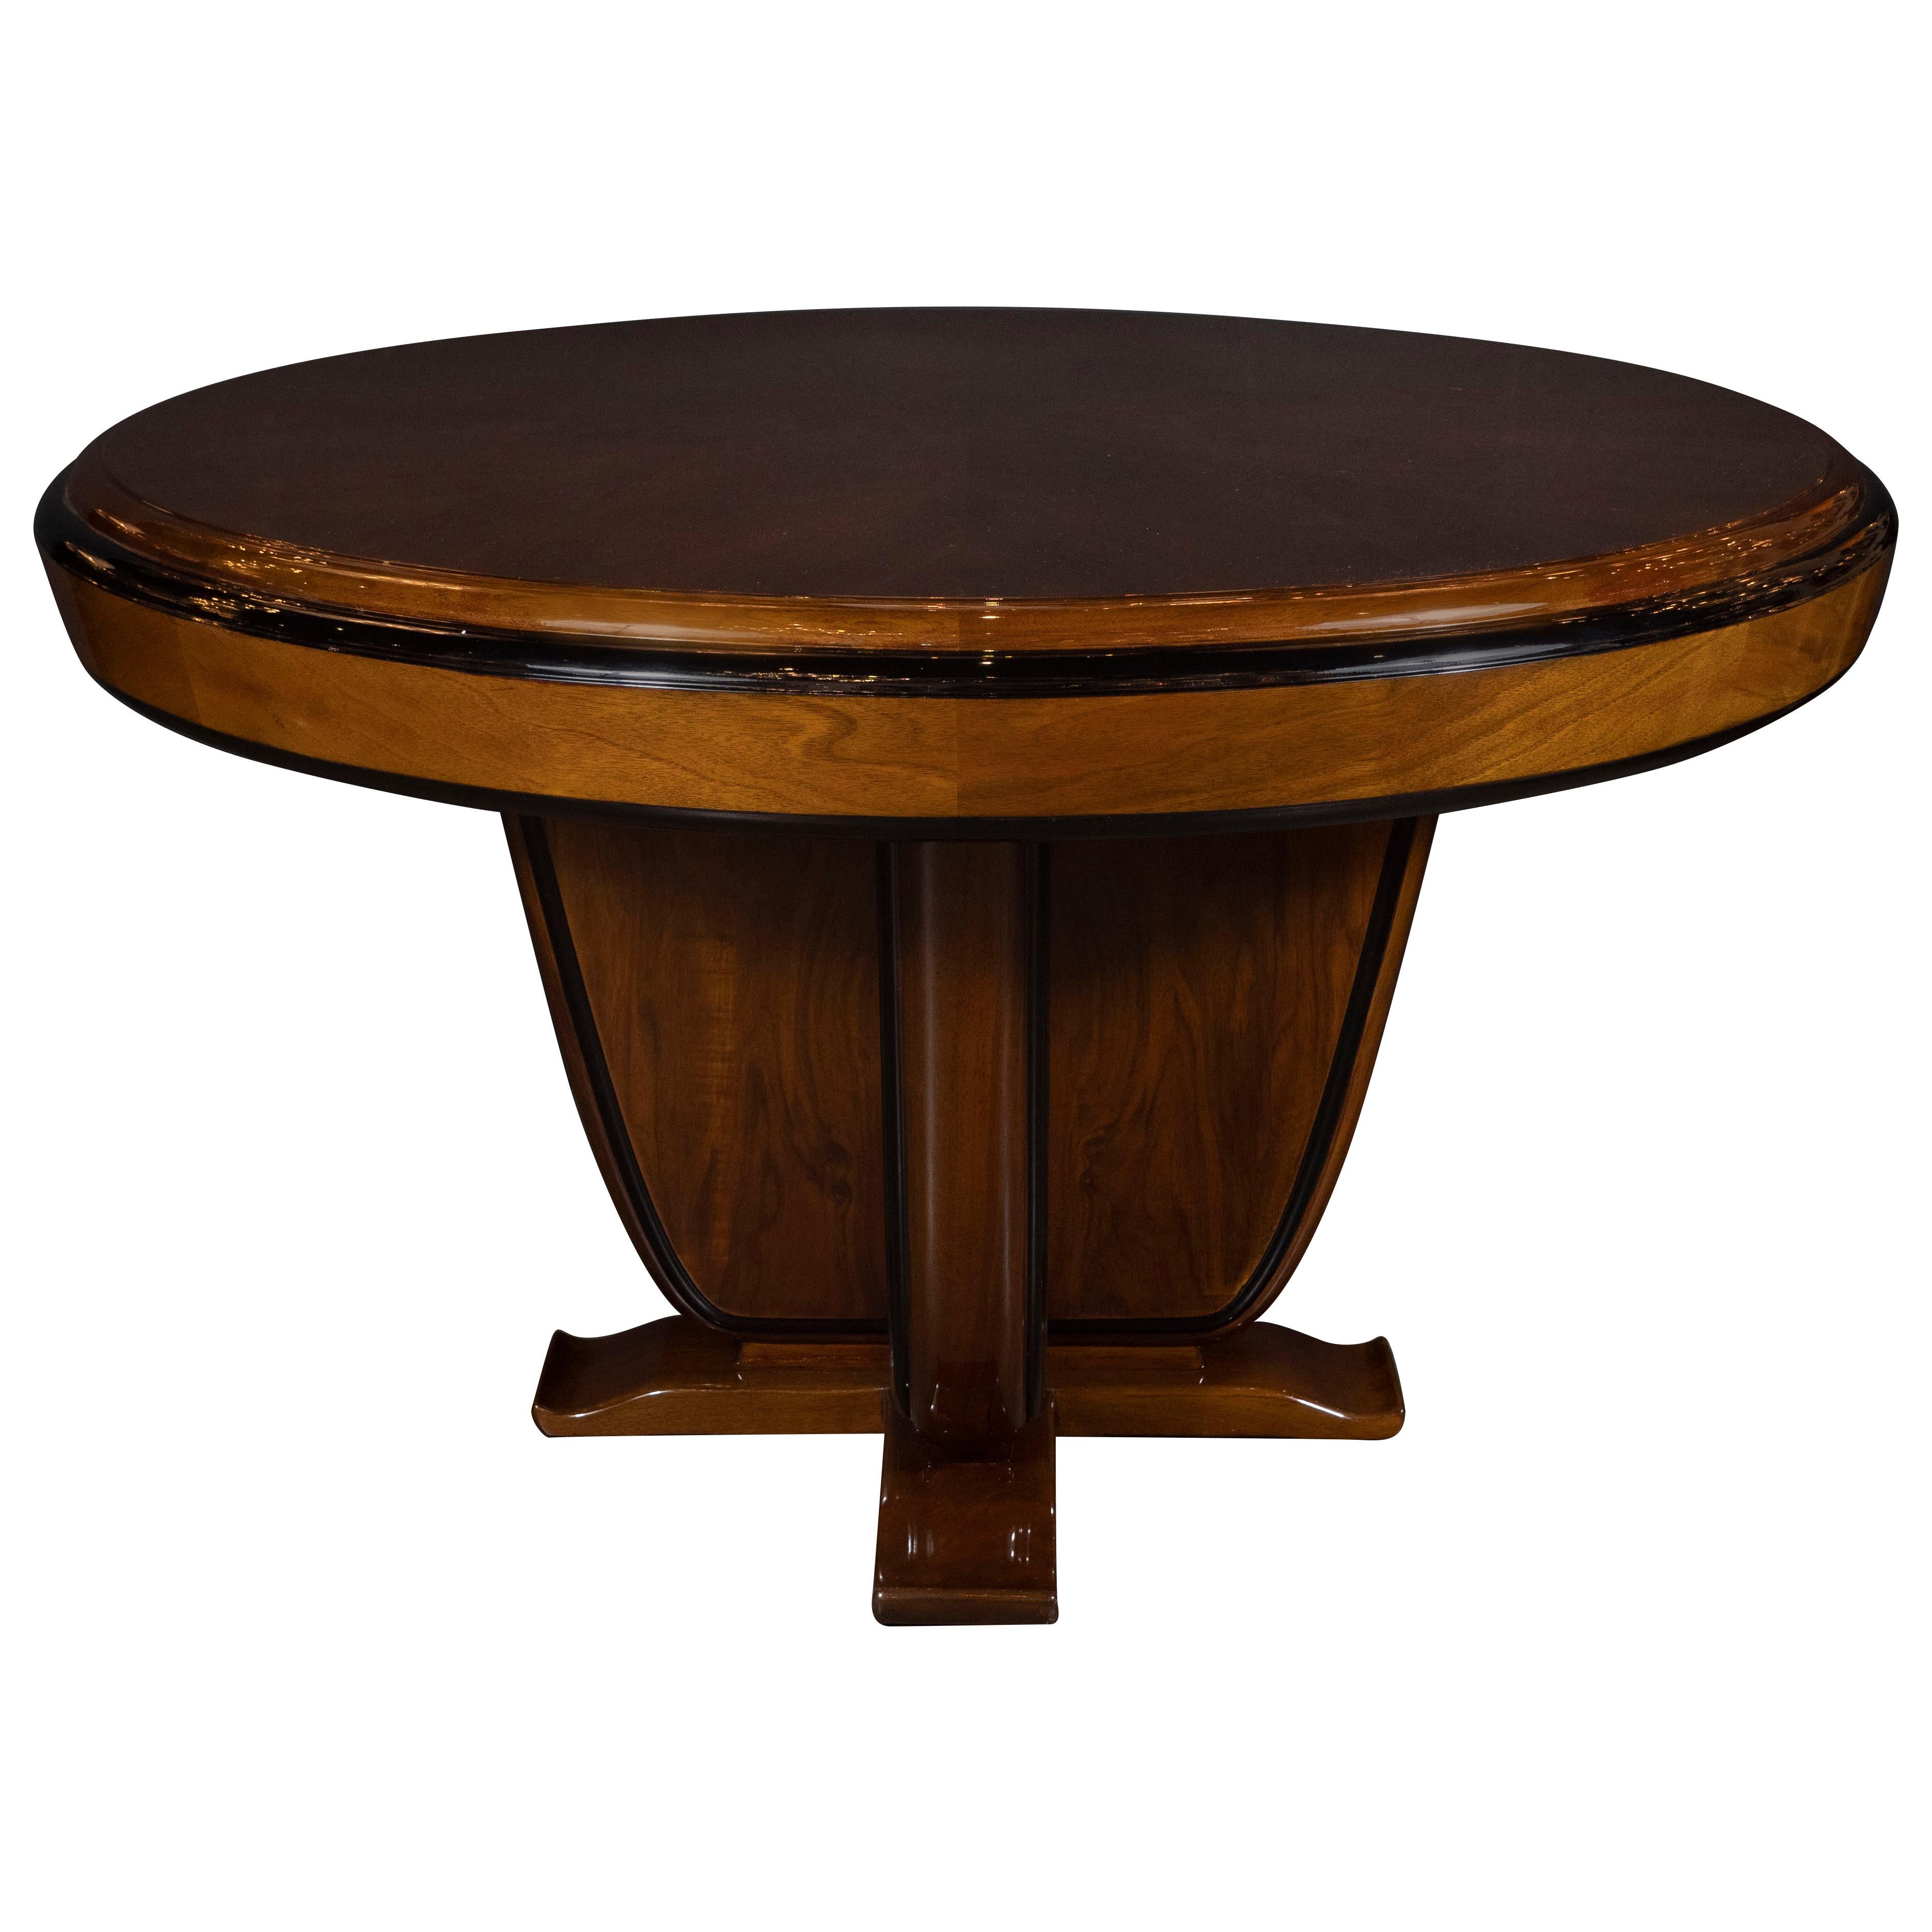 Art Deco Skyscraper Style Bookmatched Walnut & Black Lacquer Dining/Centre Table